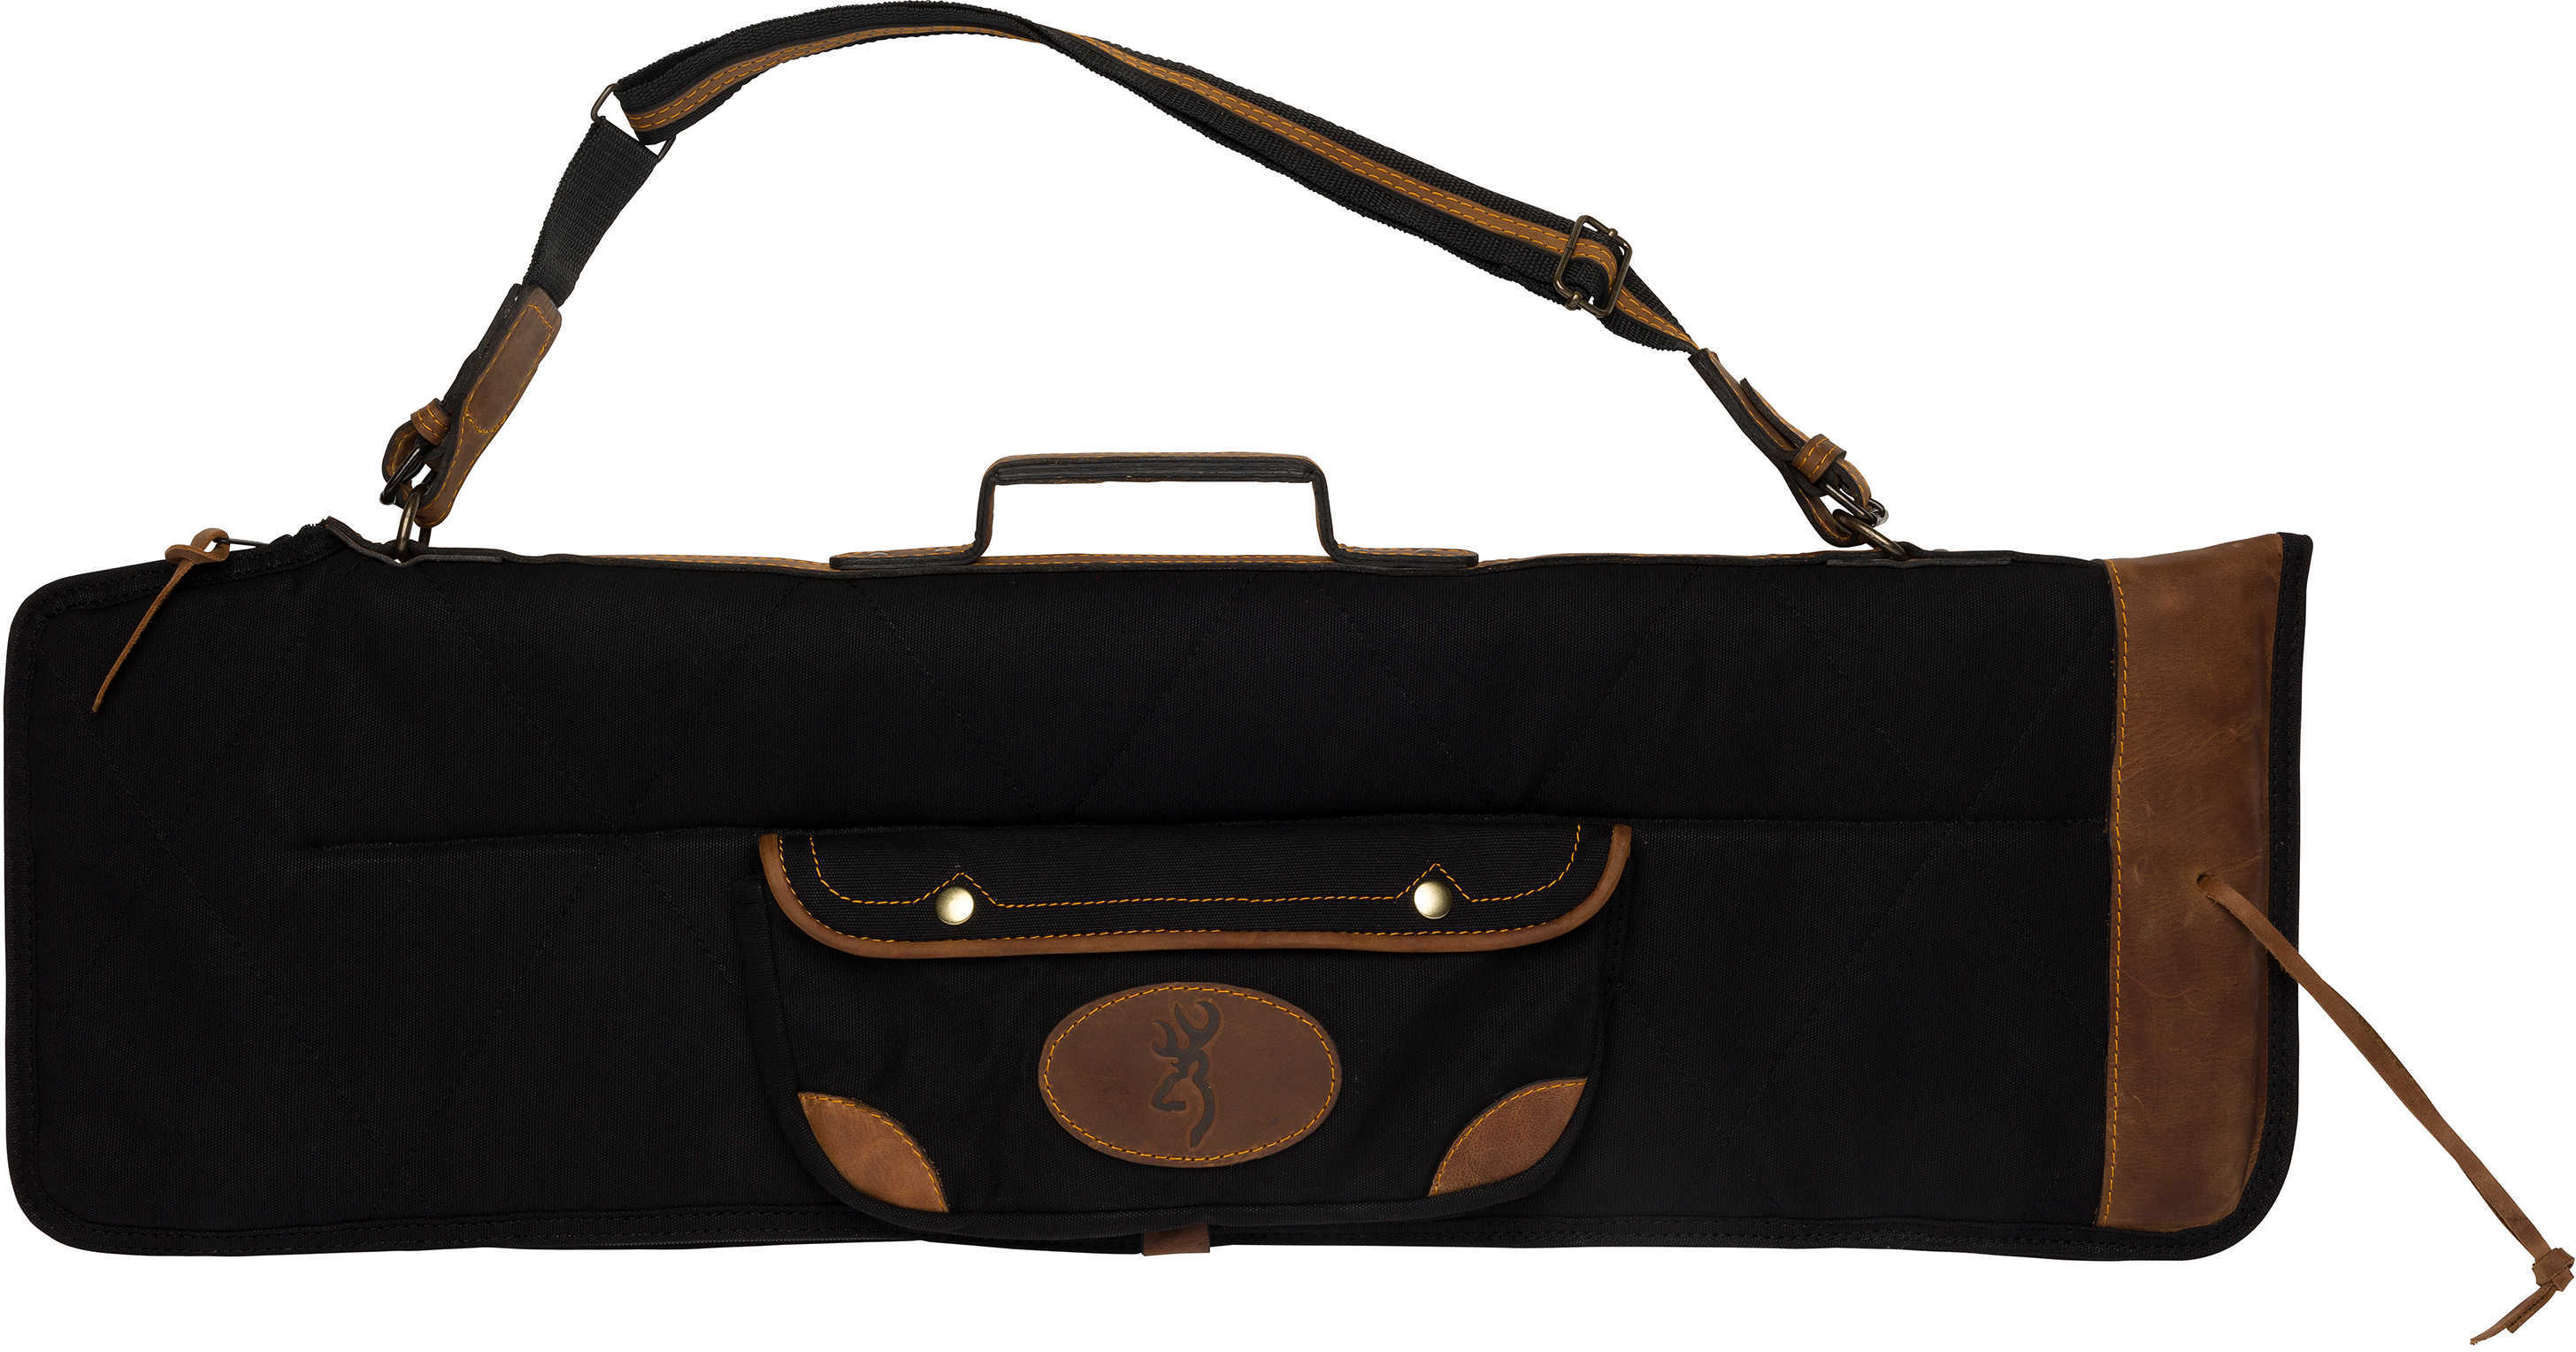 Lona Canvas/Leather Over/Under Takedown Case Black/Brown Md: 1413889912